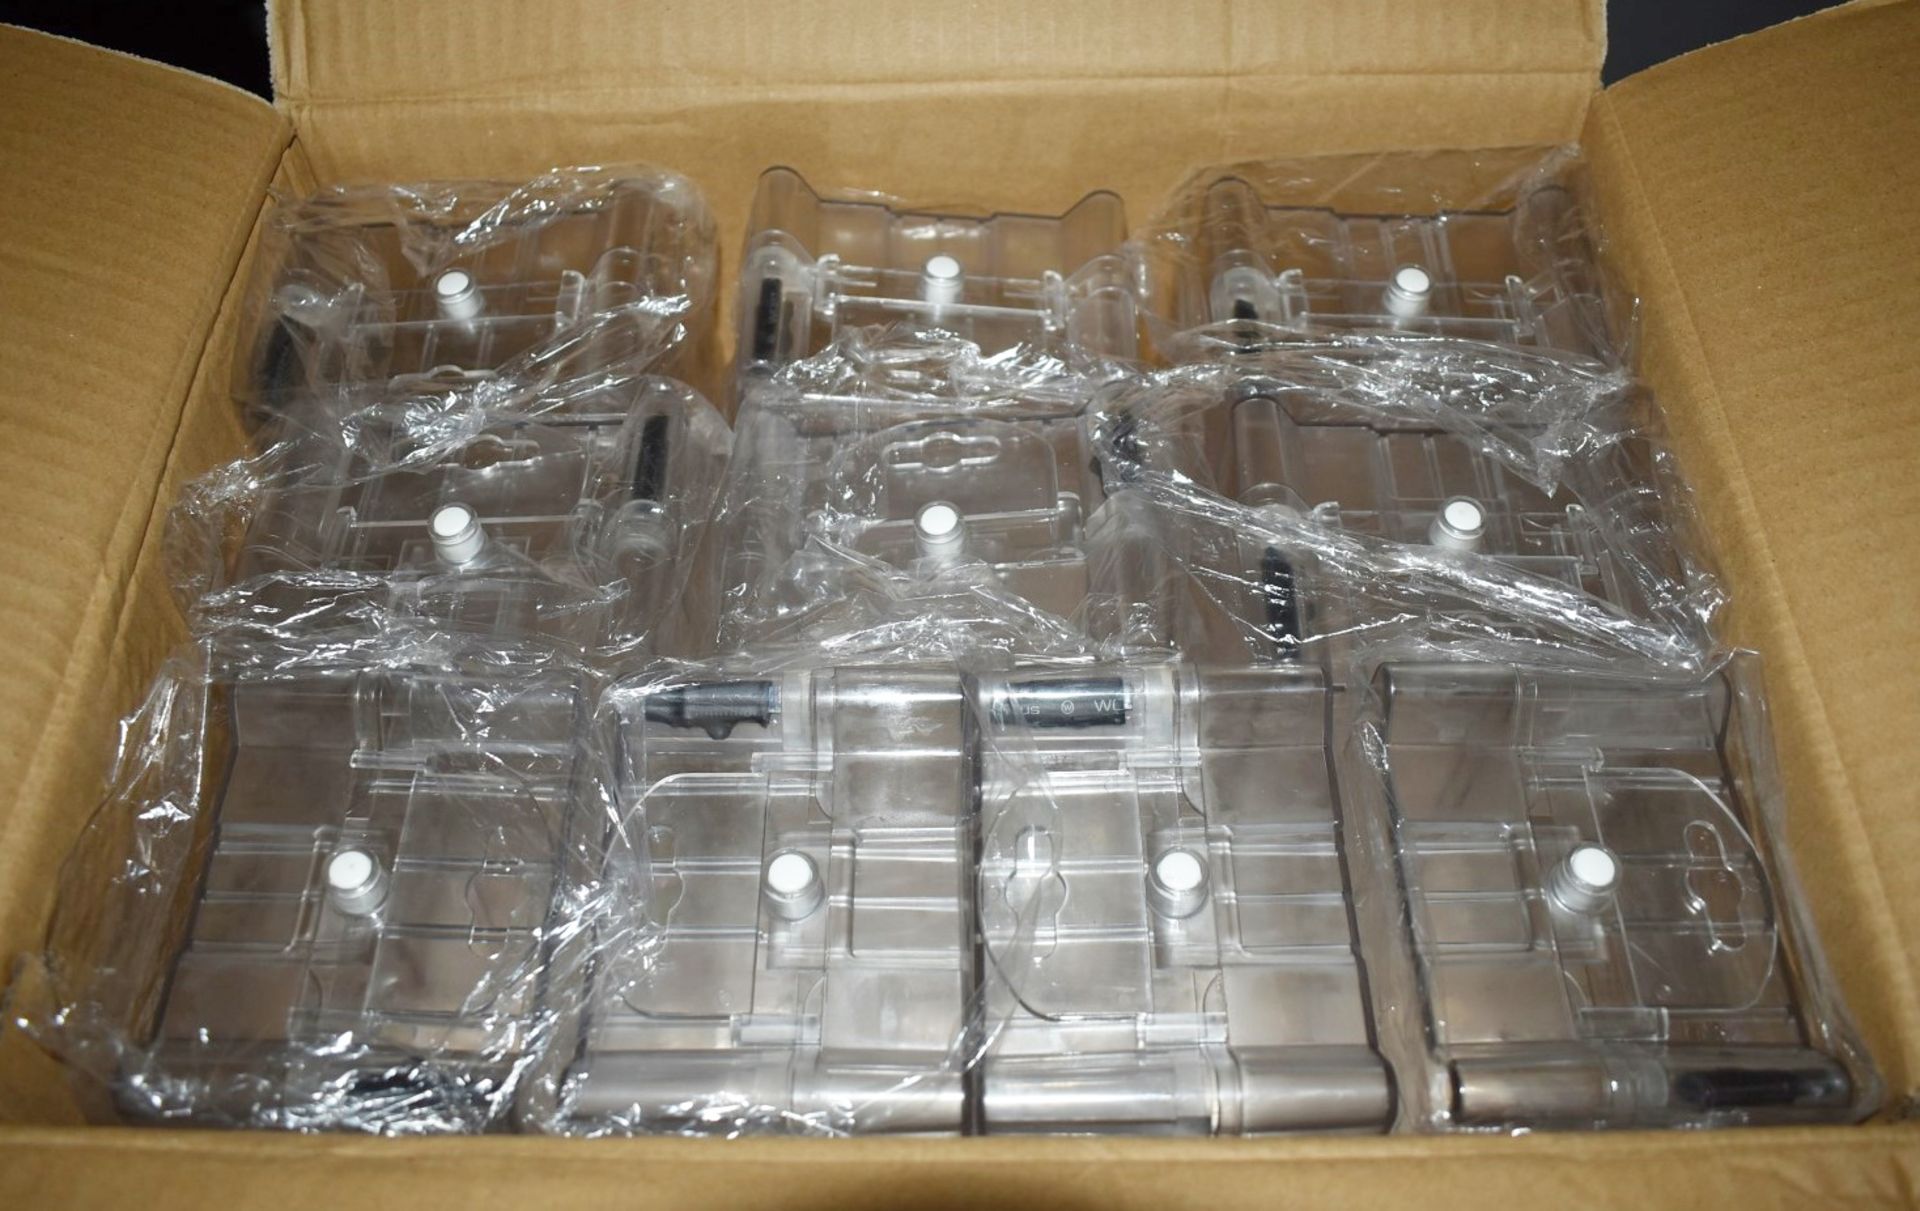 80 x Catalyst Clear Acrylic Retail Security Safer Cases With RF Tags and Hanging Tags - Brand New - Image 6 of 9